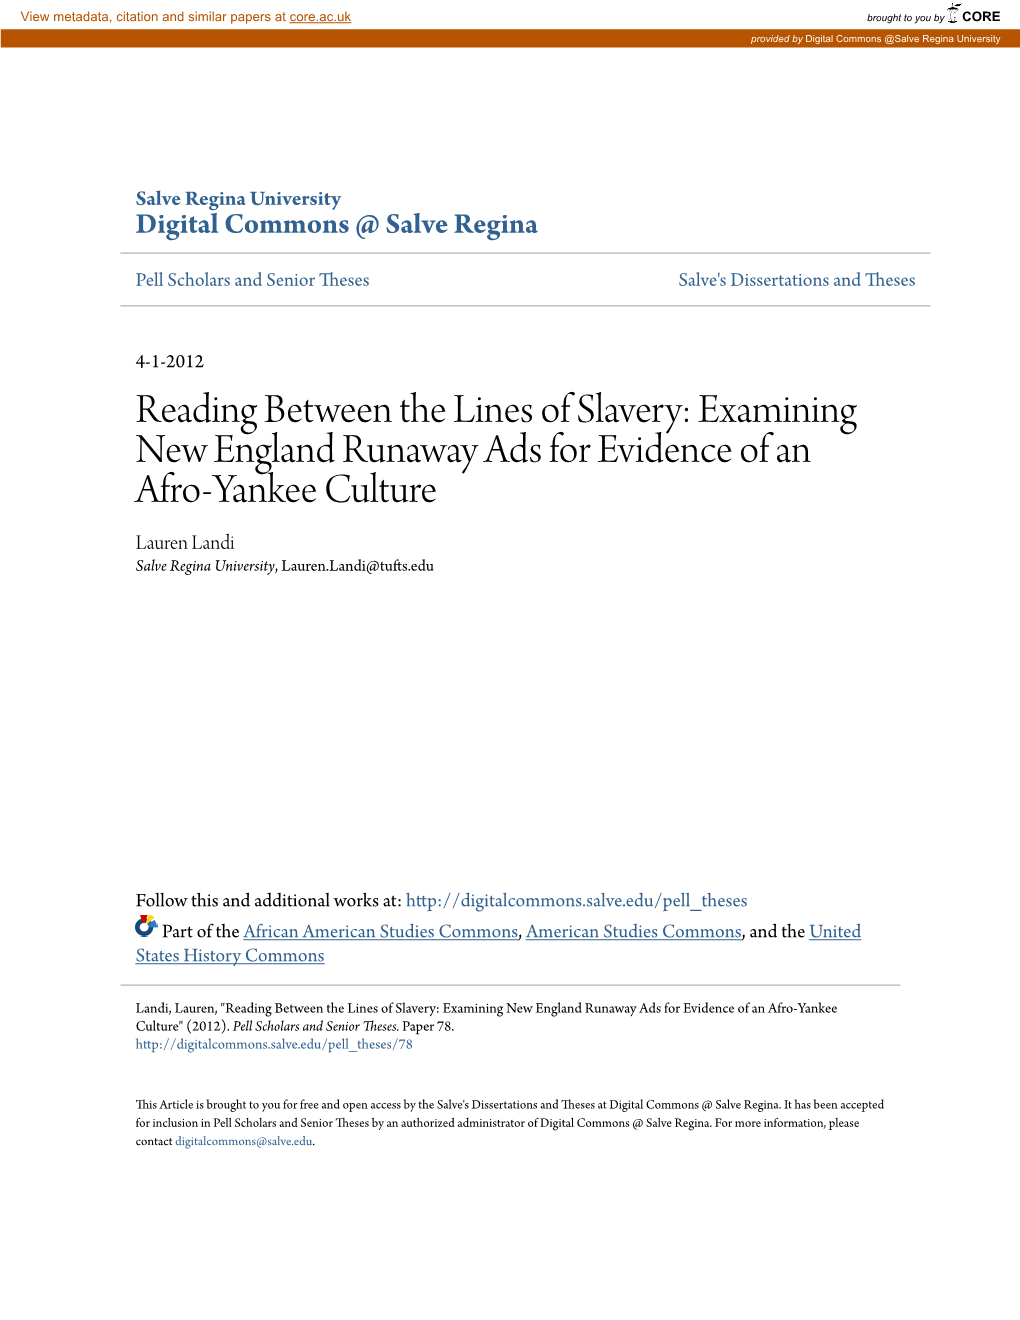 Reading Between the Lines of Slavery: Examining New England